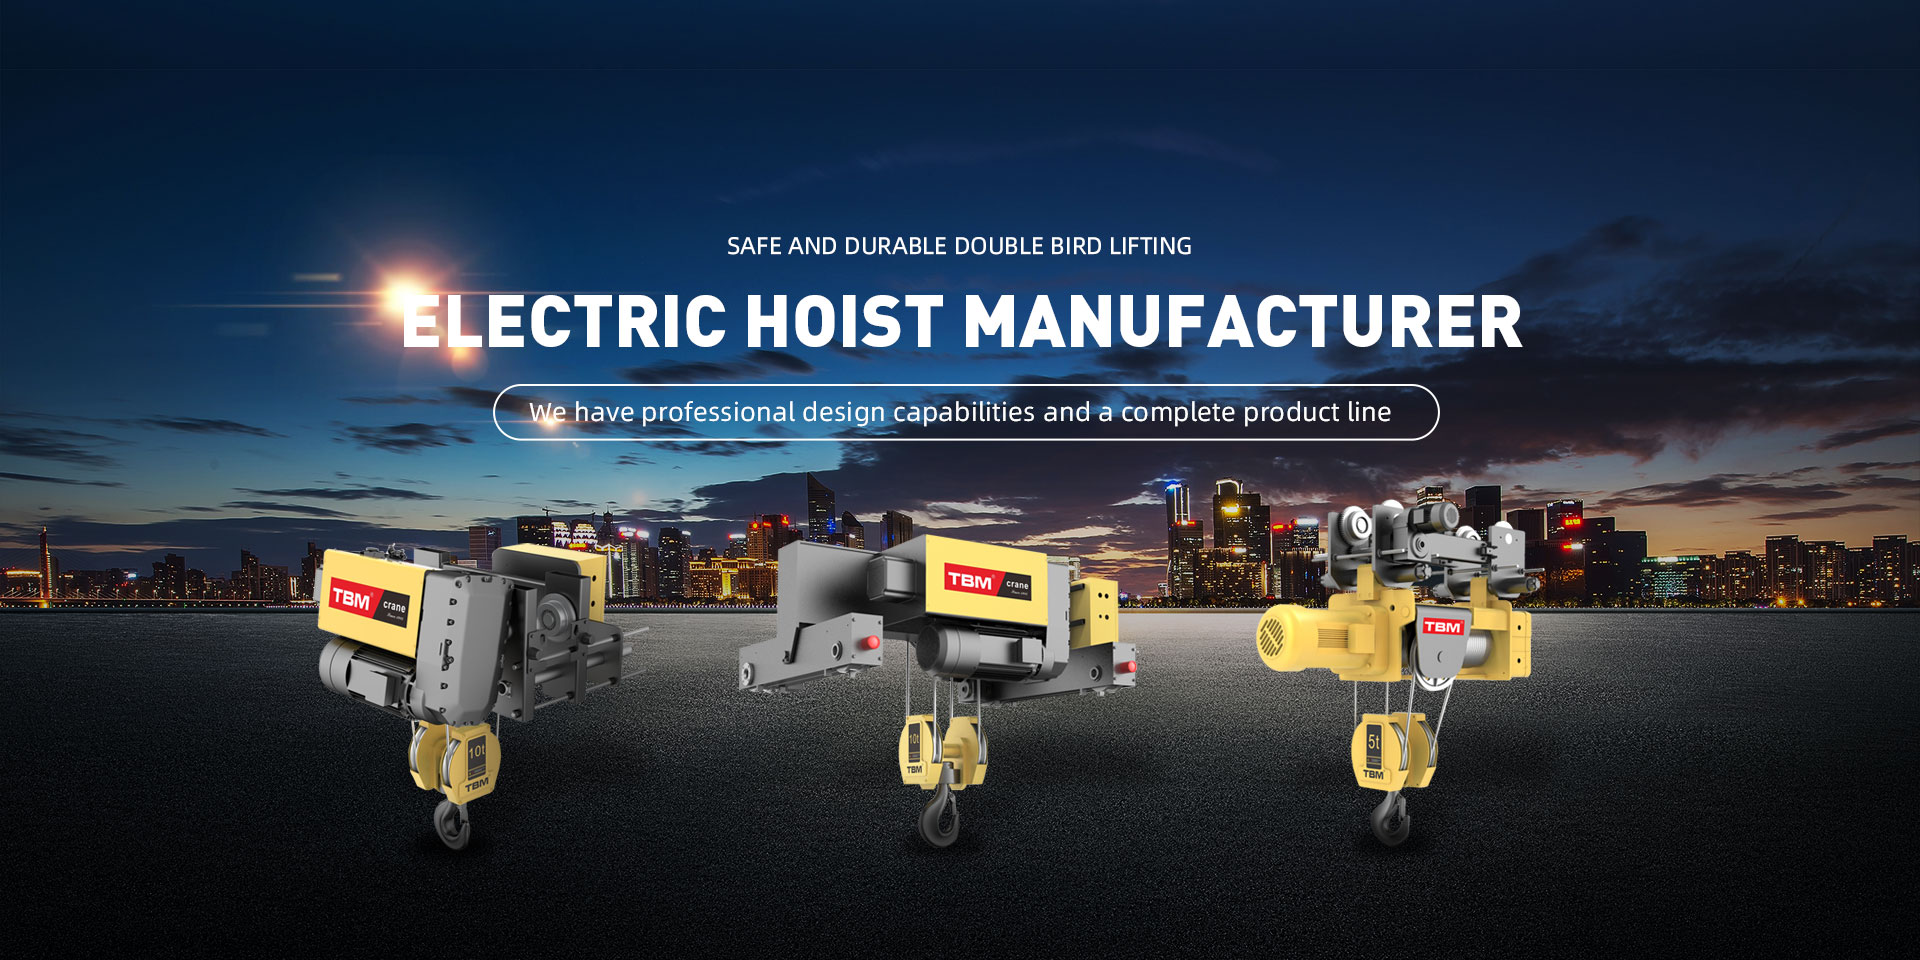 Monorail hoist suppliers share the difference between hoists, monorails and cranes